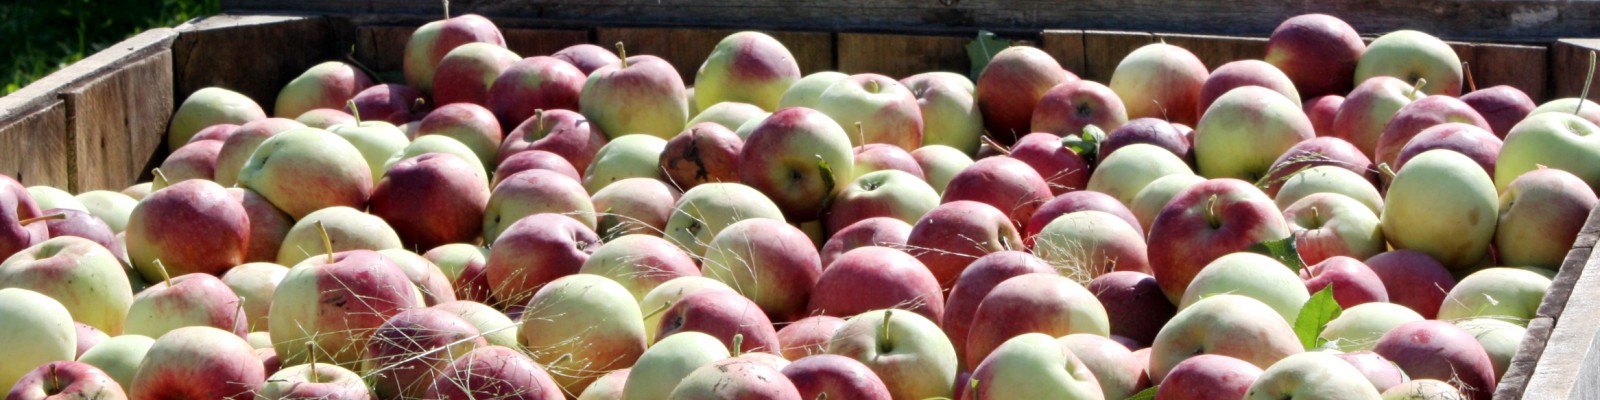 close-up of vermont apples in a bin, ready for market